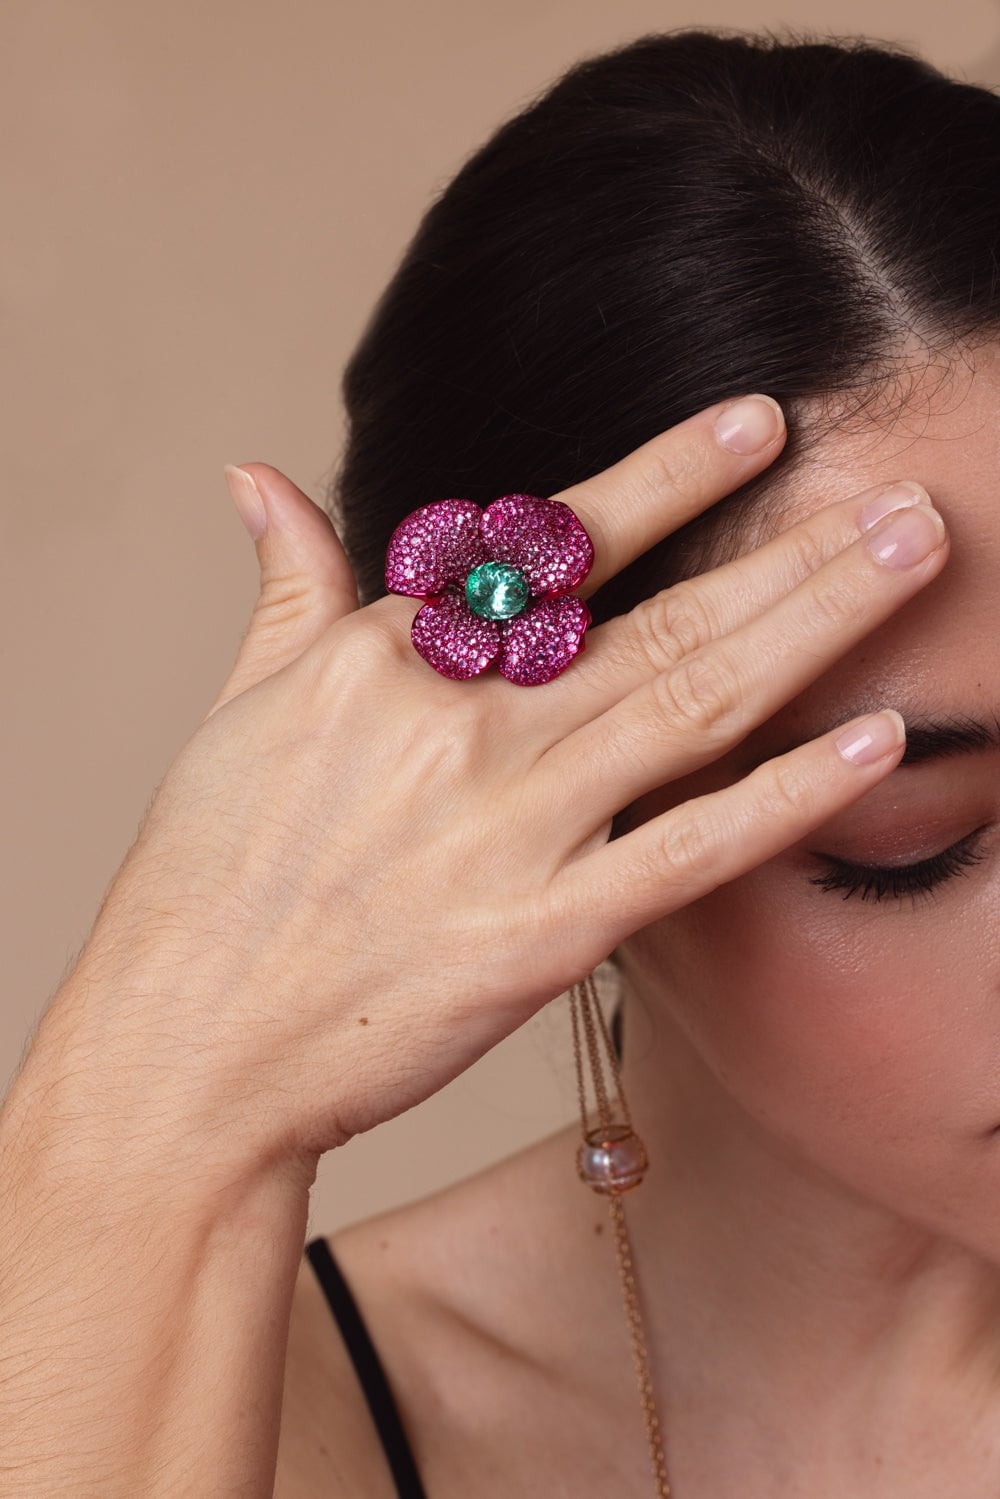 The Twilight Orchid Ring JEWELRYFINE JEWELRING KATHERINE JETTER   